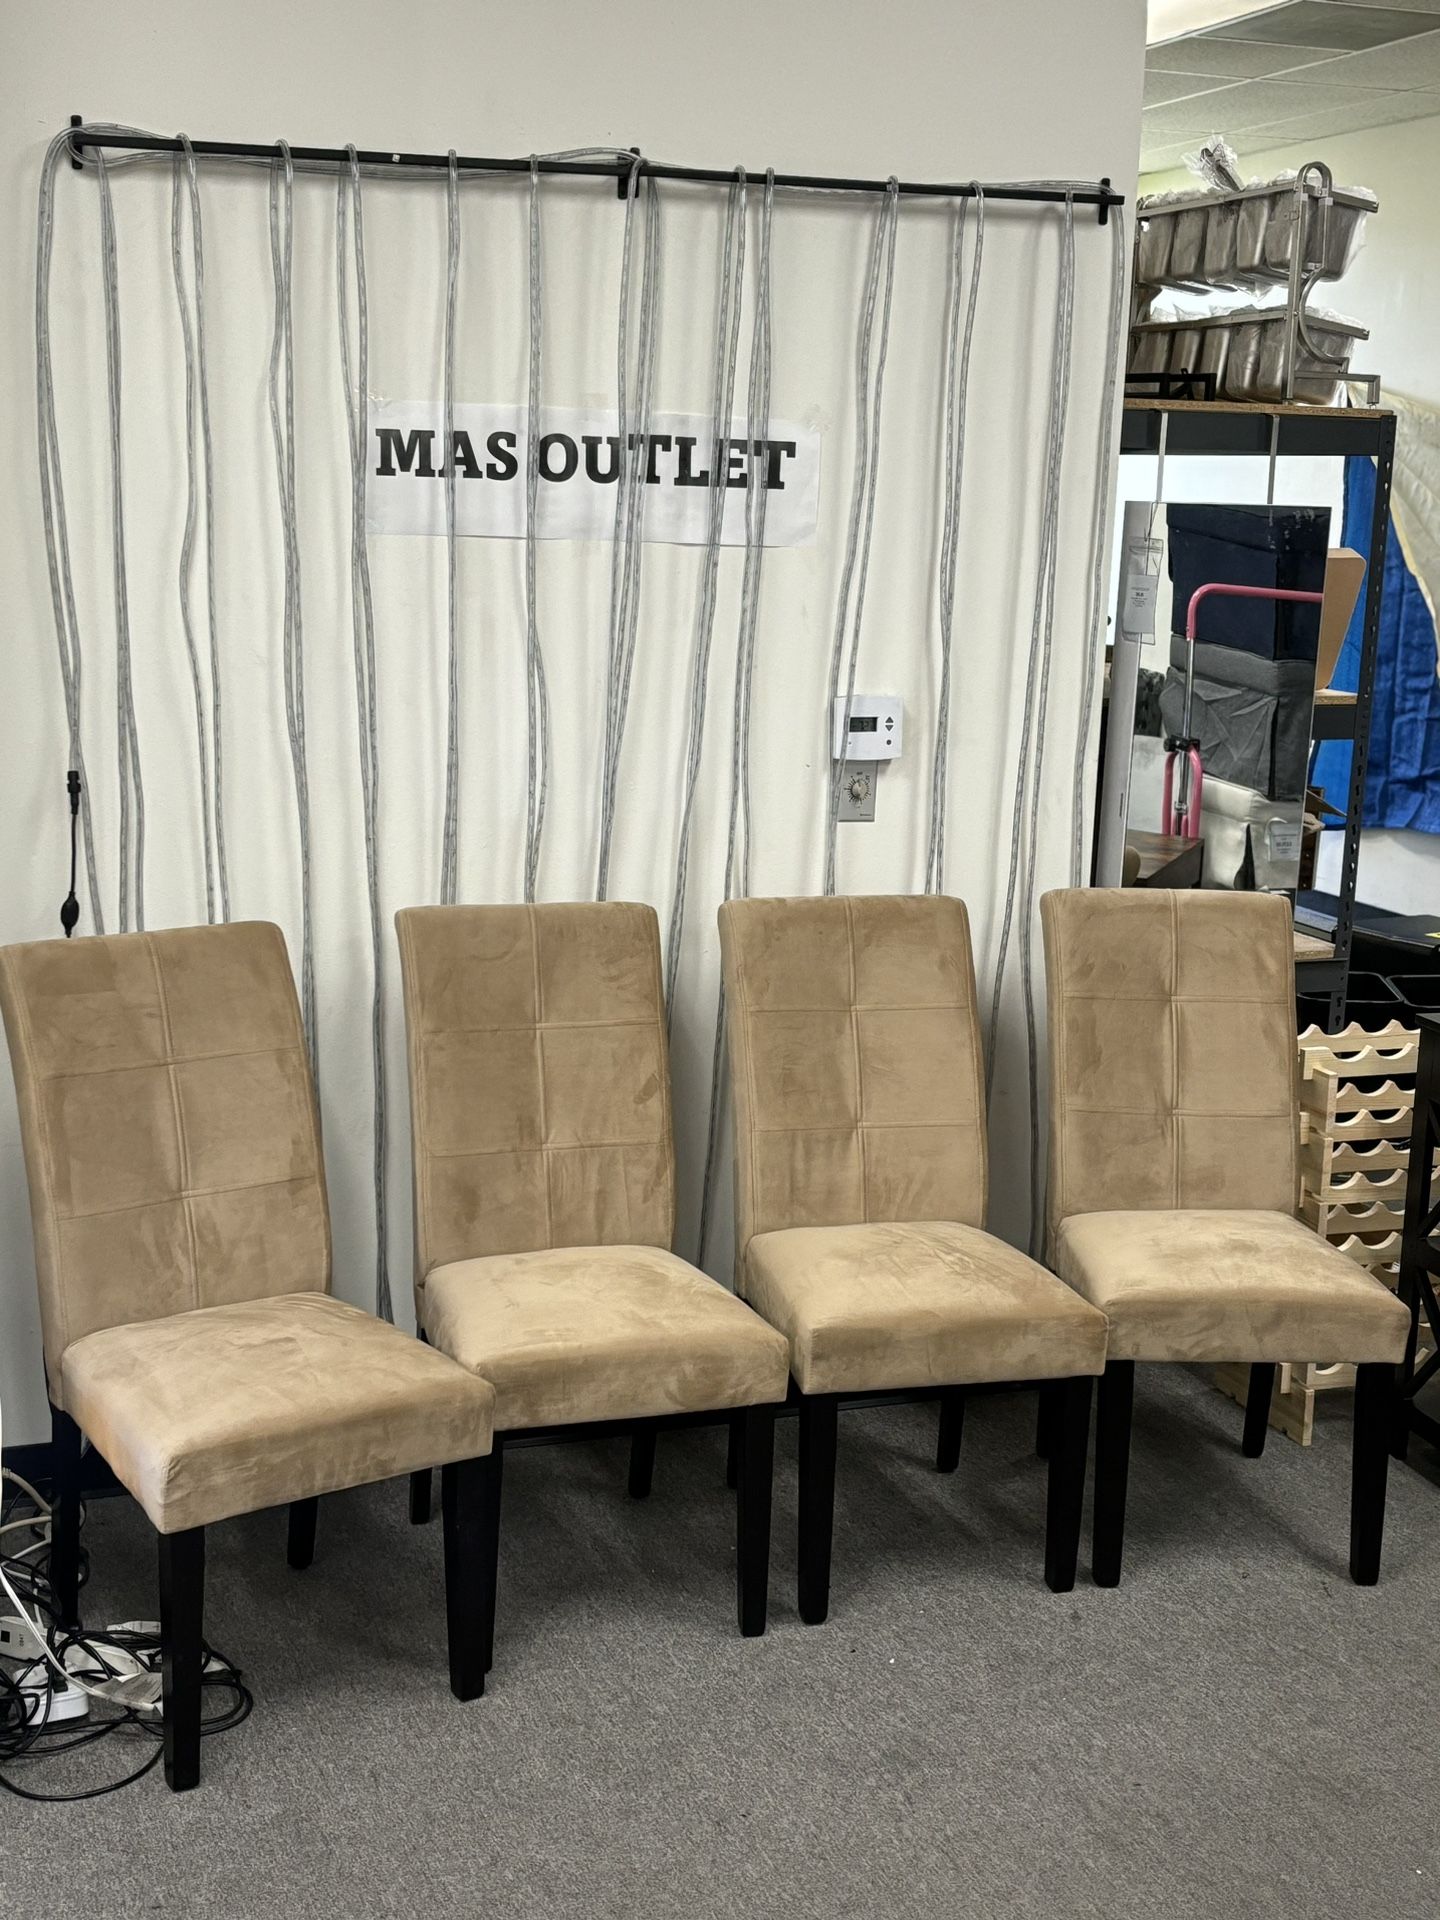 NEW!!! Fabric Upholstered Dining Room Chairs Set of 4 Khaki